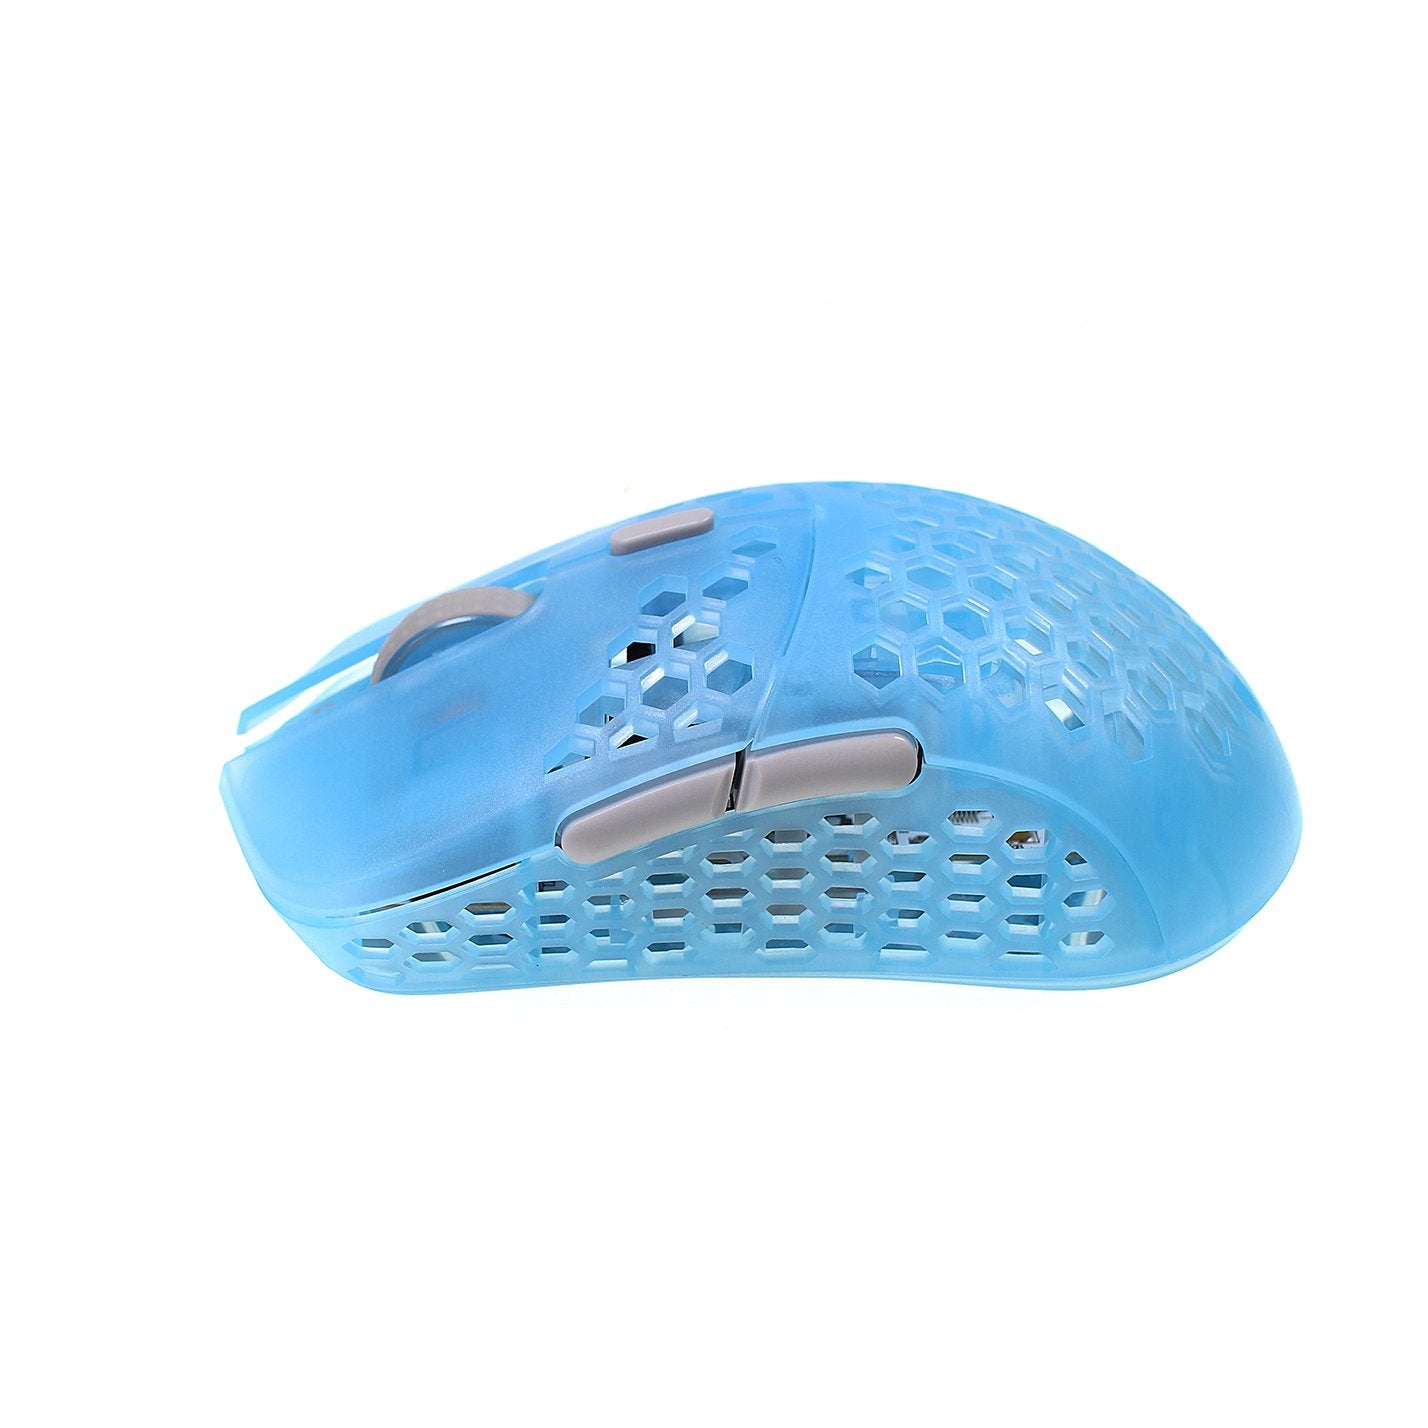 G-wolves Hati Small HTS Transparent Blue Wired Gaming Mouse 